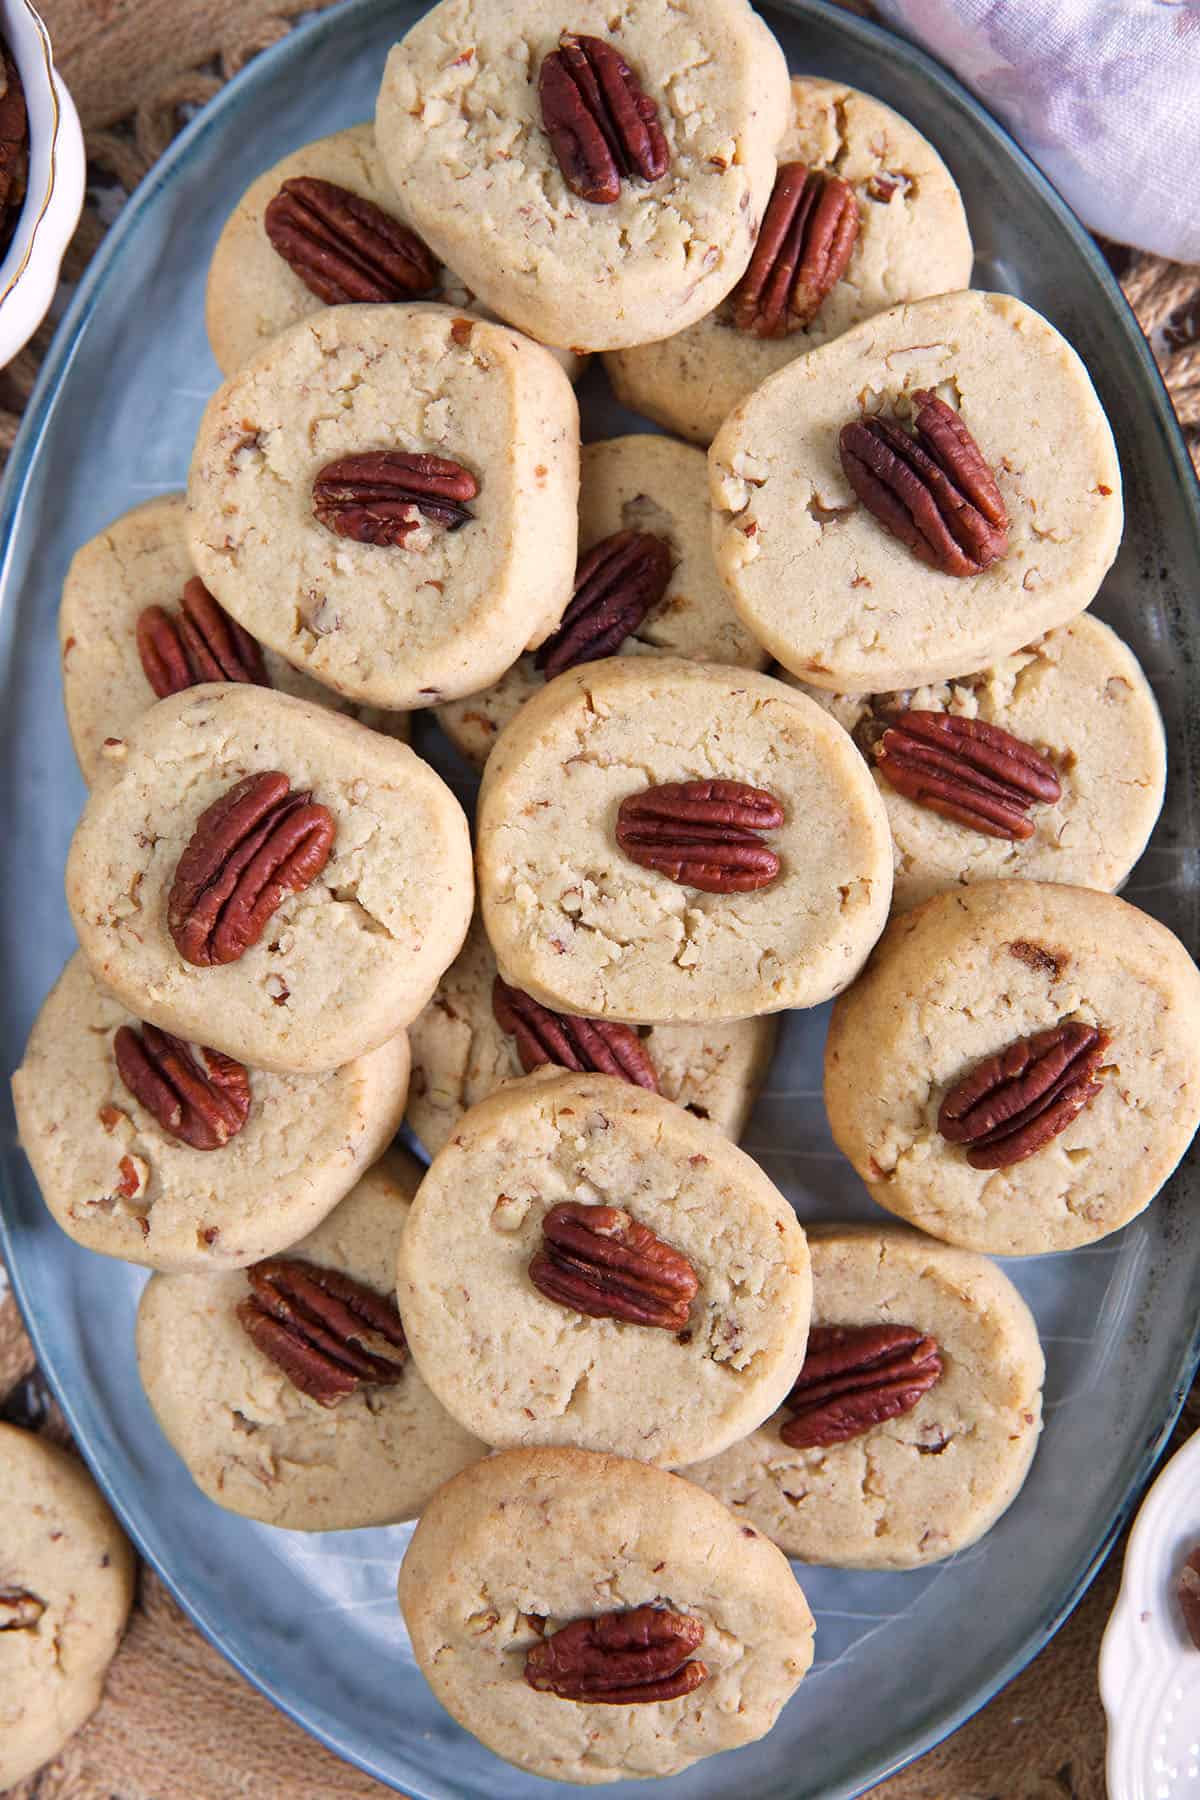 A big batch of pecan sandies are placed on an oval serving platter.